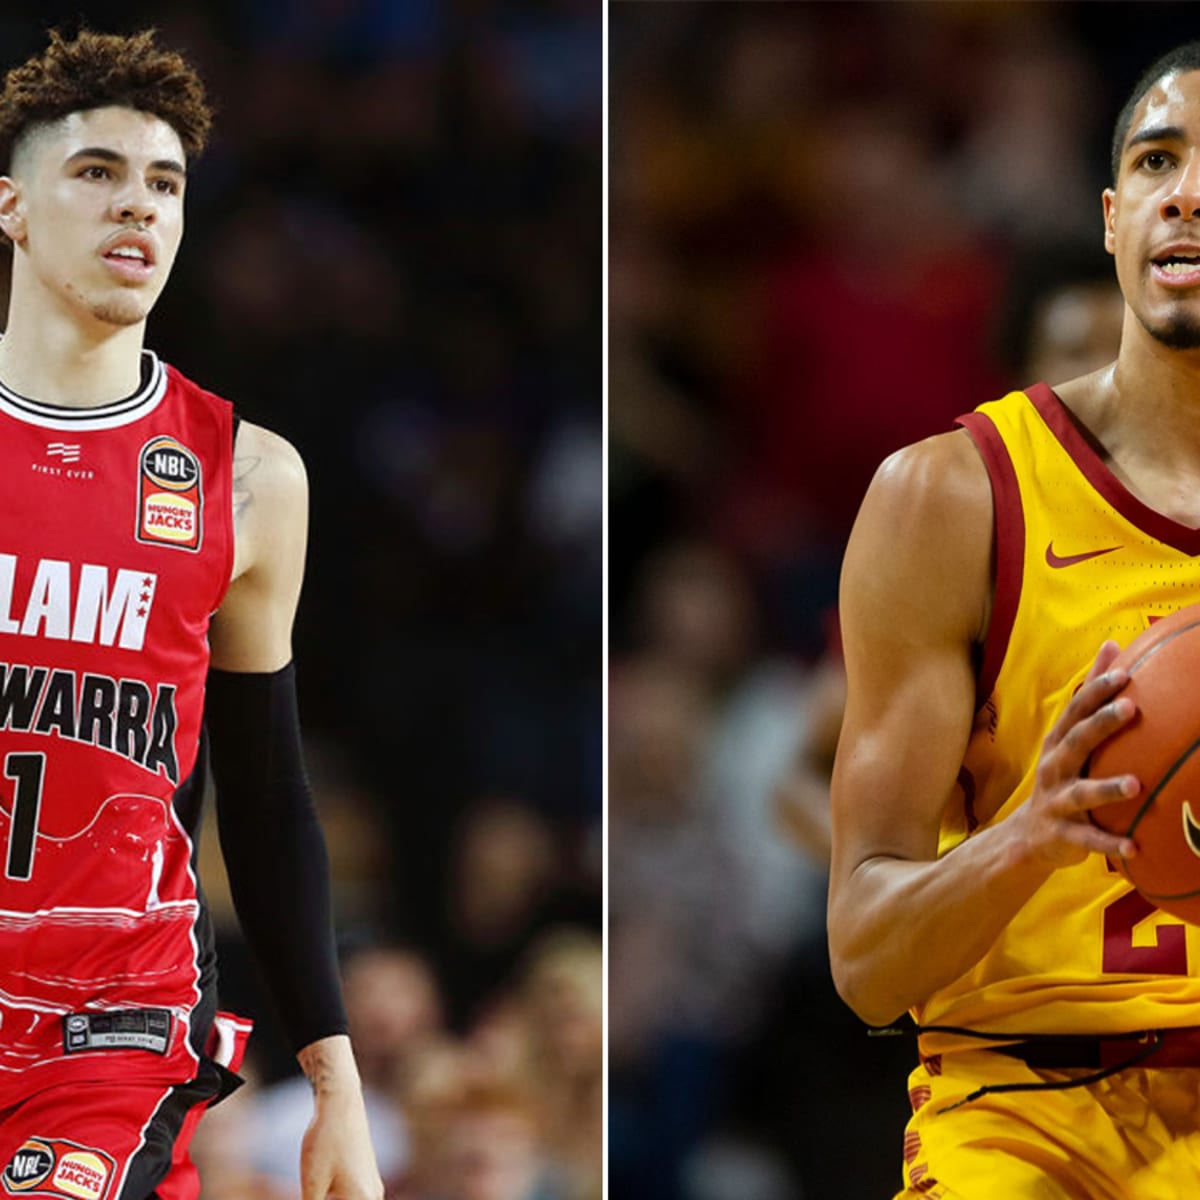 NBA Draft results 2020: Grades, analysis for every pick in Round 1